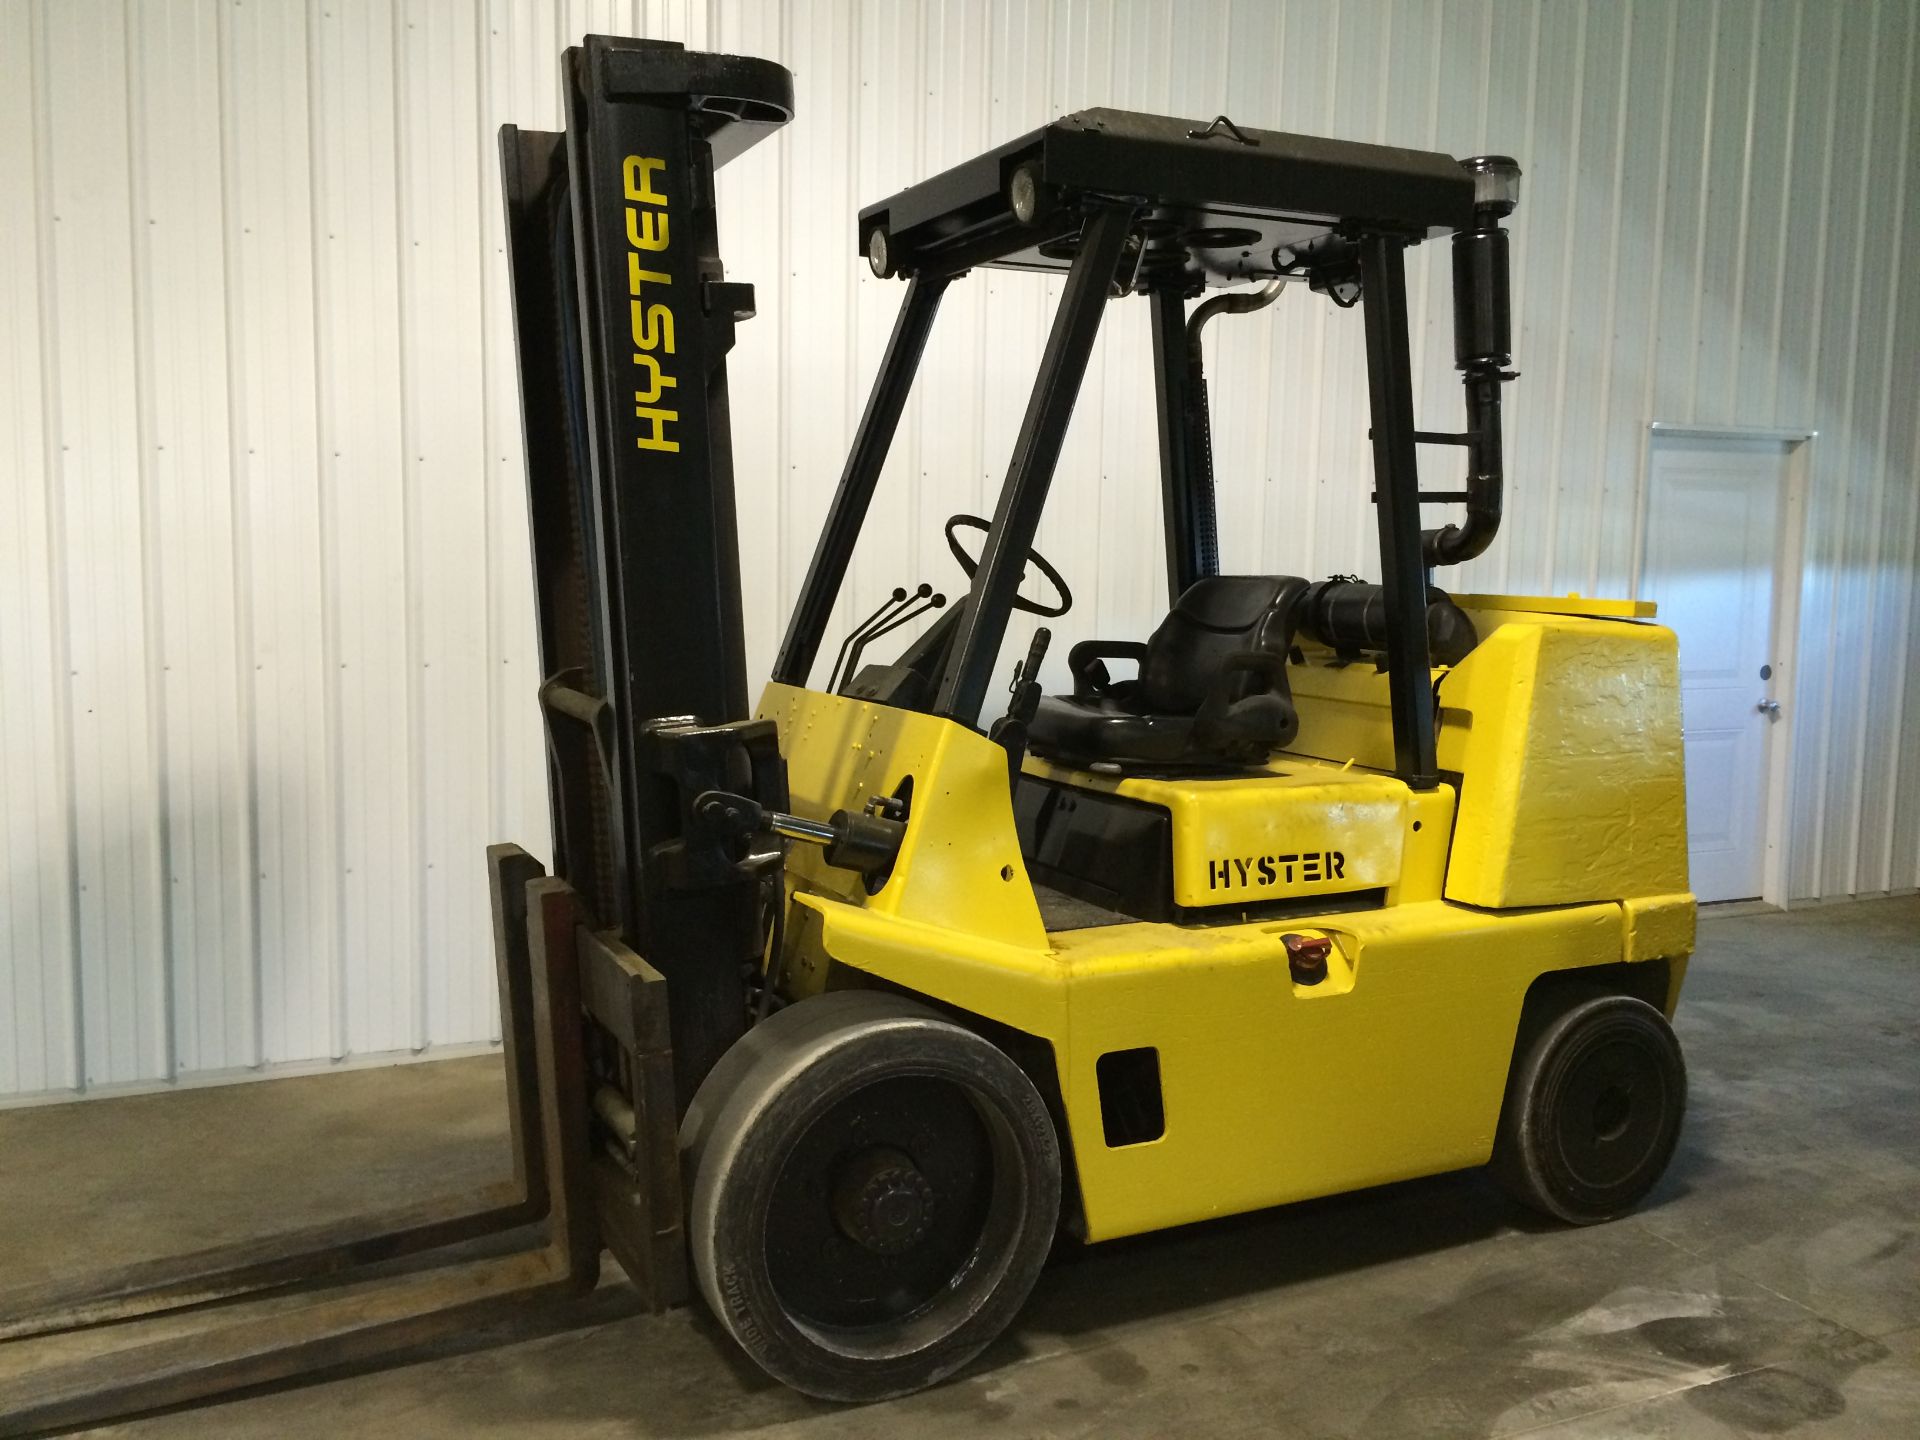 2006 HYSTER 15,500-lb. Capacity Forklift, Model S155XL2,Perkins Diesel Engine, 2-Speed Lever